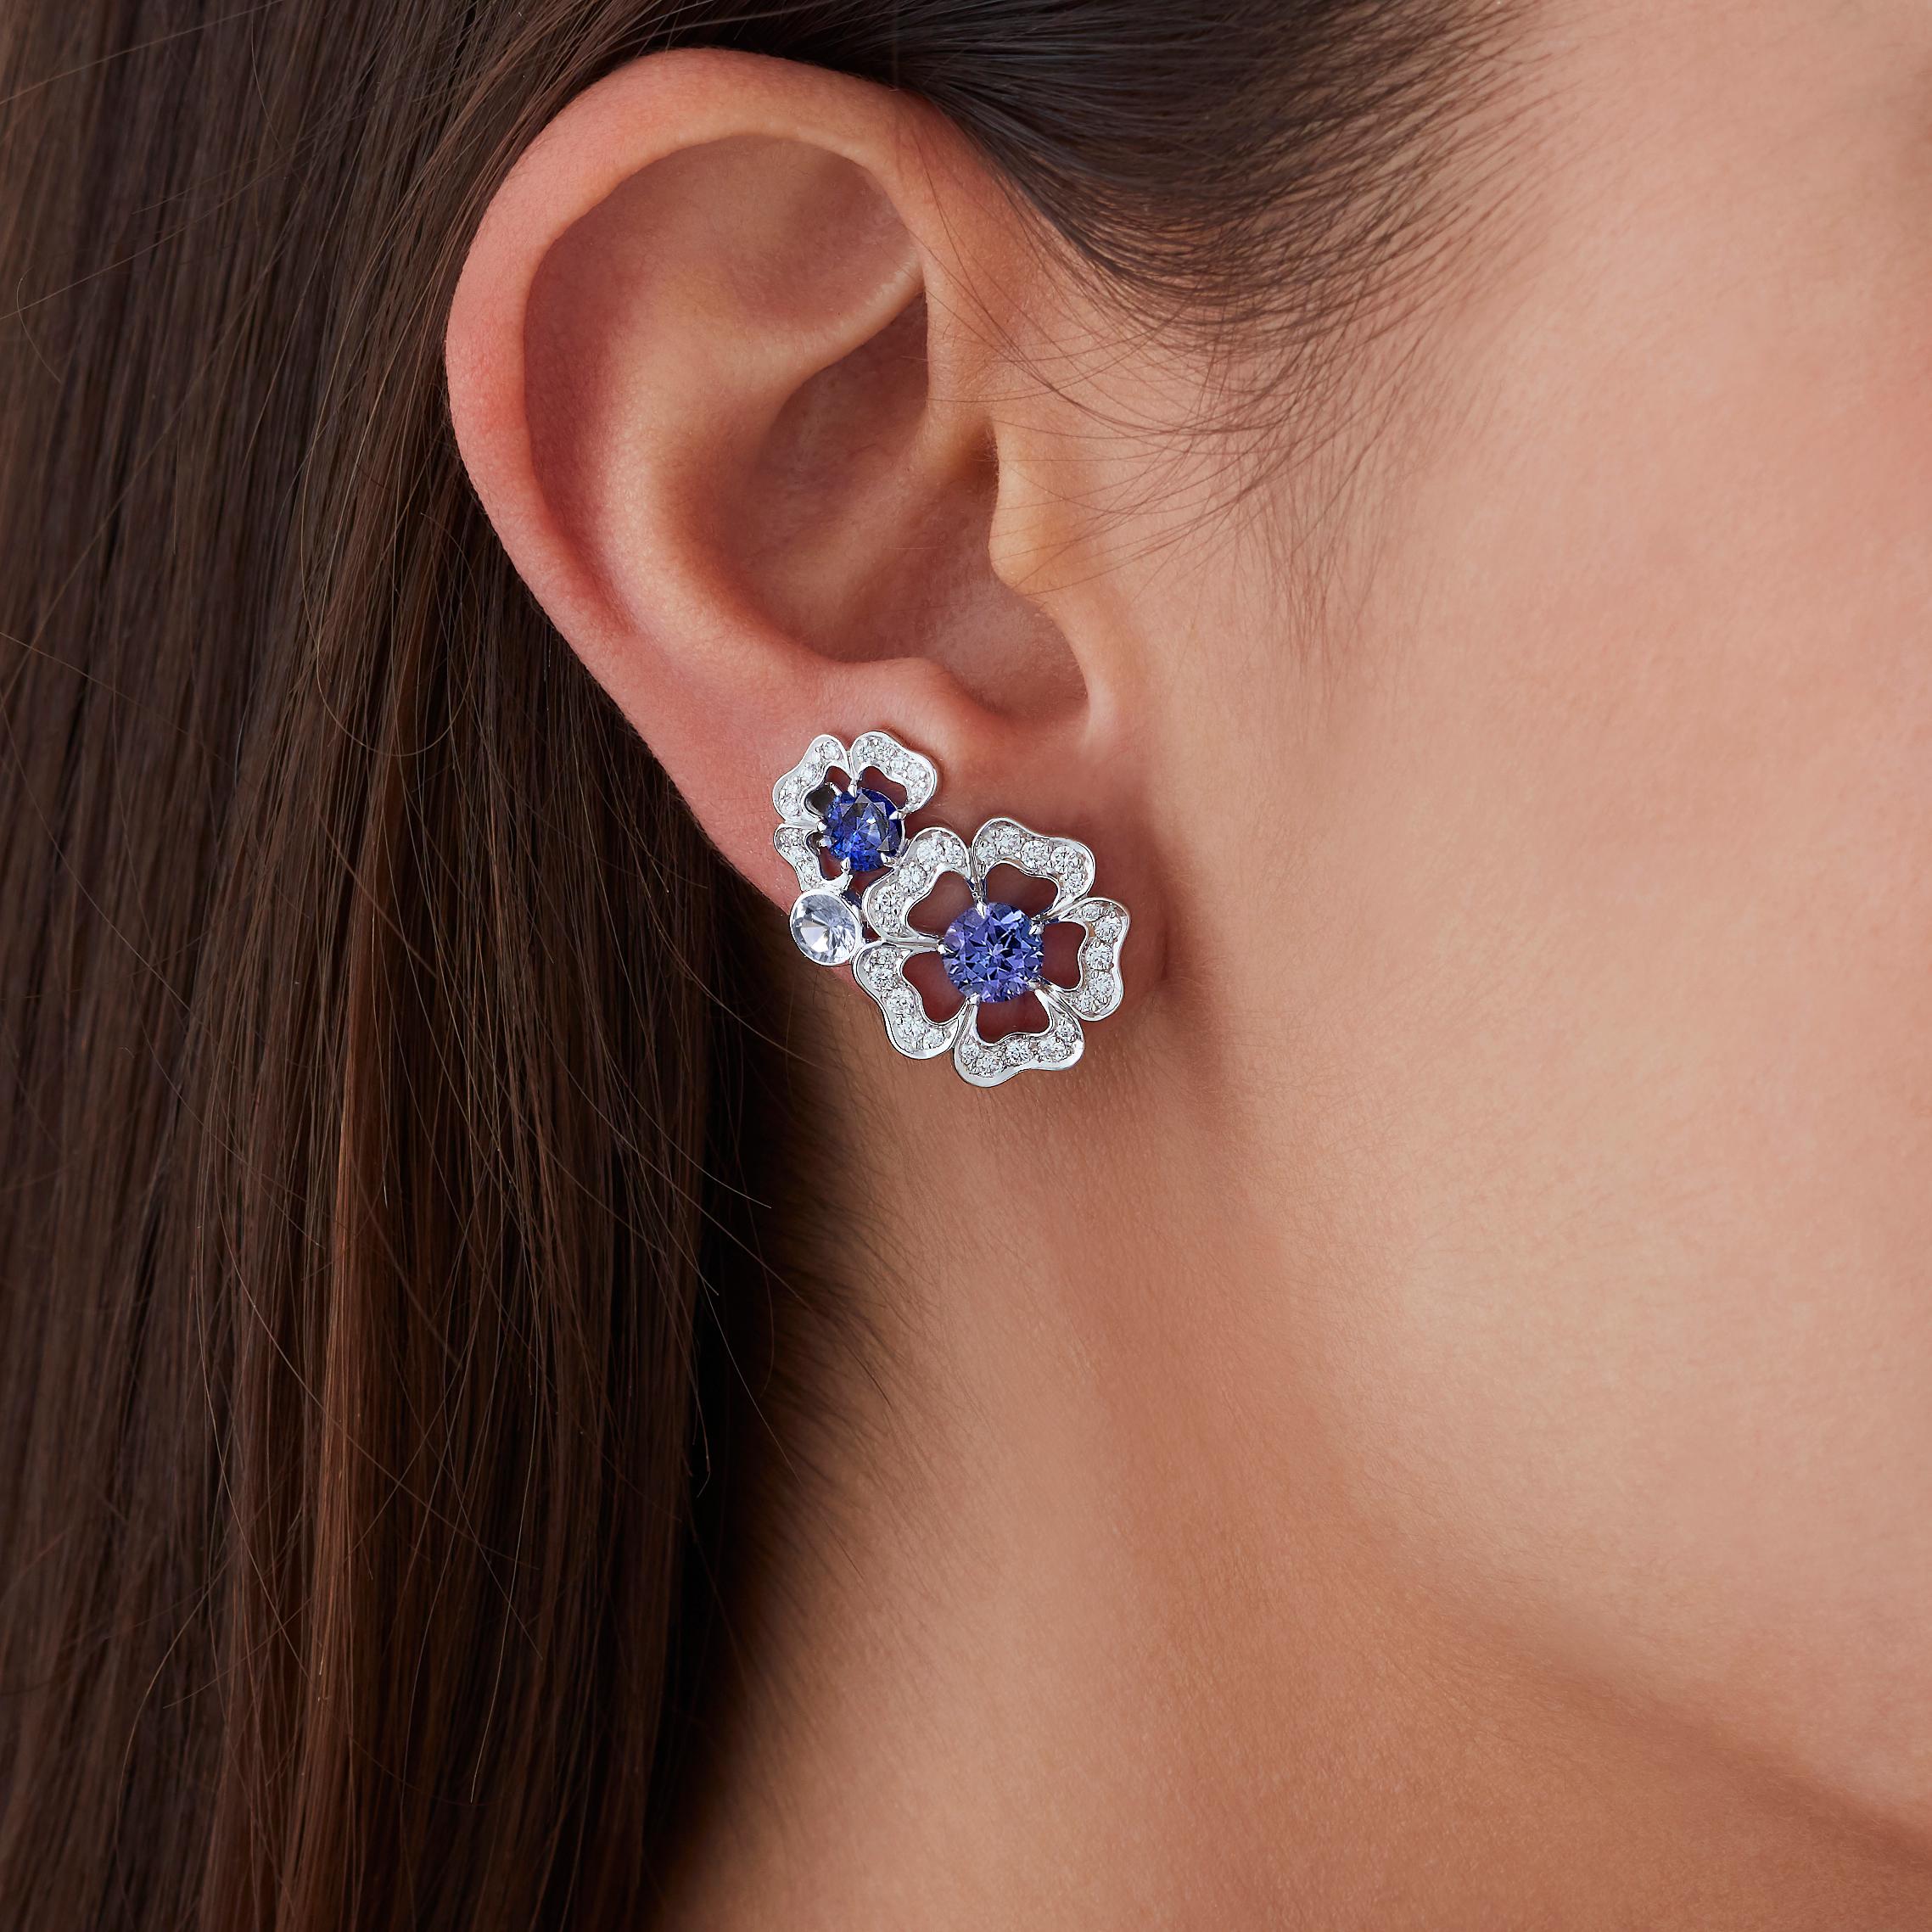 A House of Garrard pair of 18 karat white gold ear climbers from the 'Tudor Rose Petal' collection set with blue sapphires, tanzanites and round white diamonds.
                                                                                        